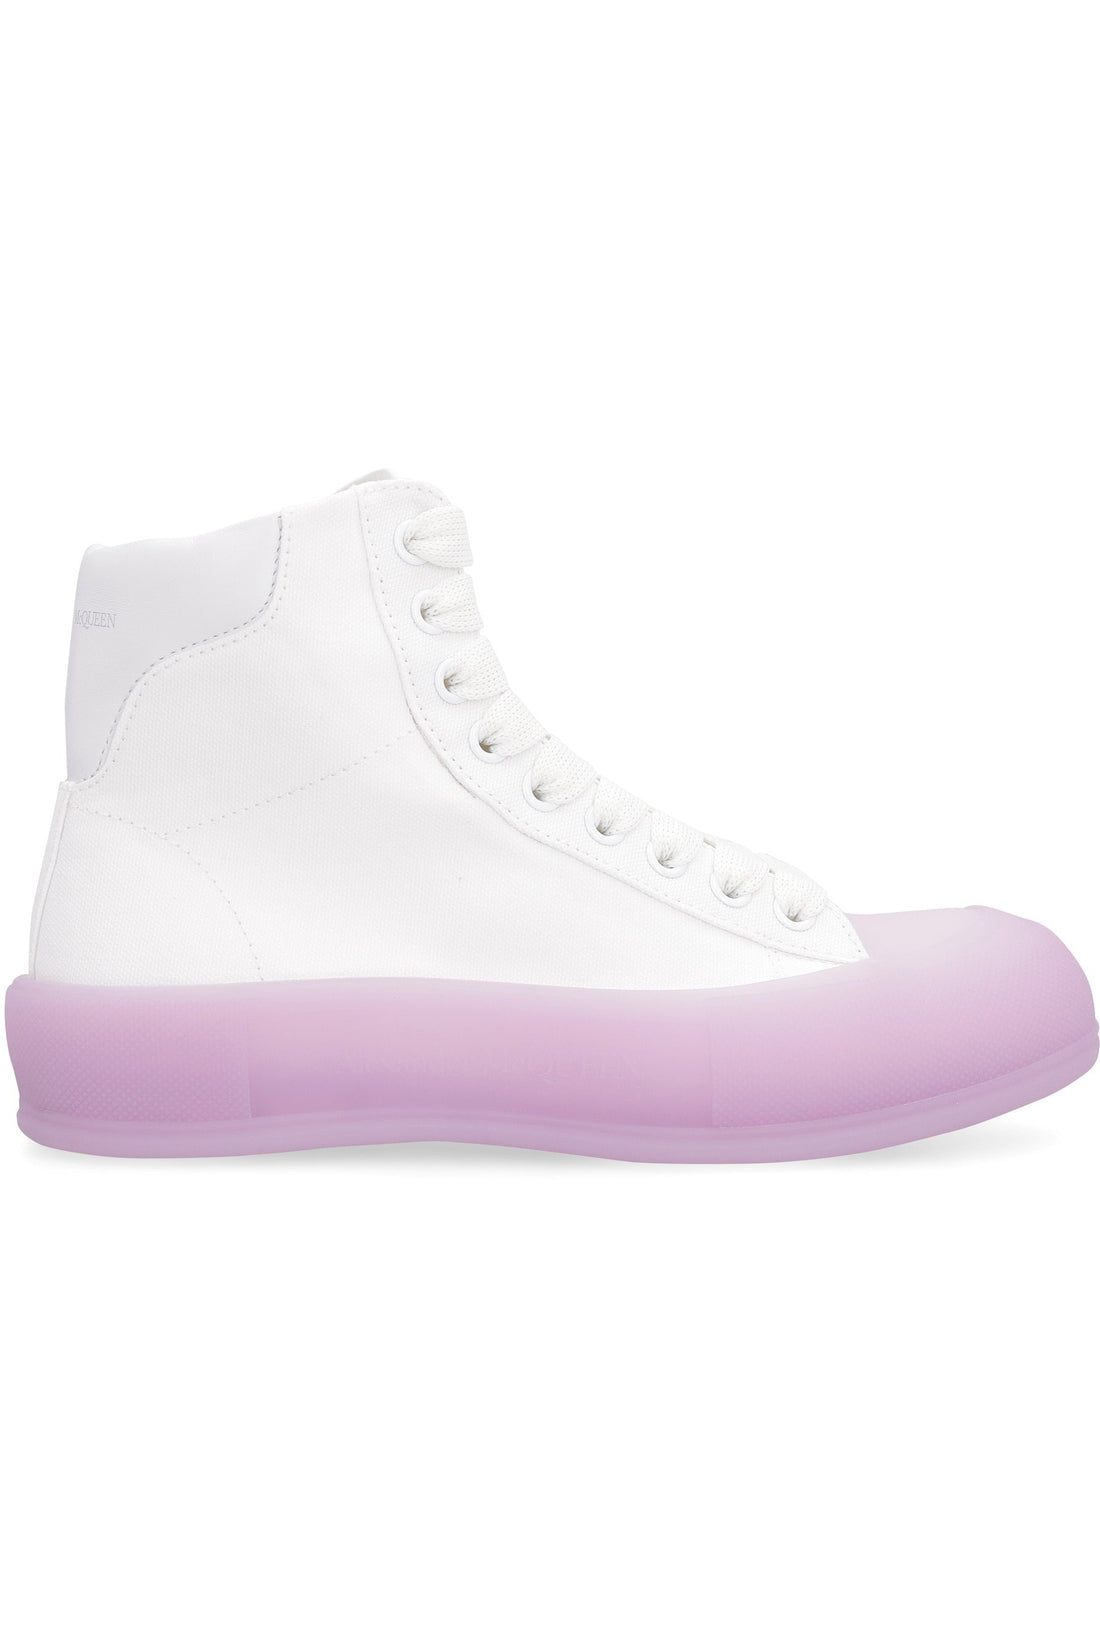 Alexander McQueen-OUTLET-SALE-Da Skate chunky sneakers-ARCHIVIST